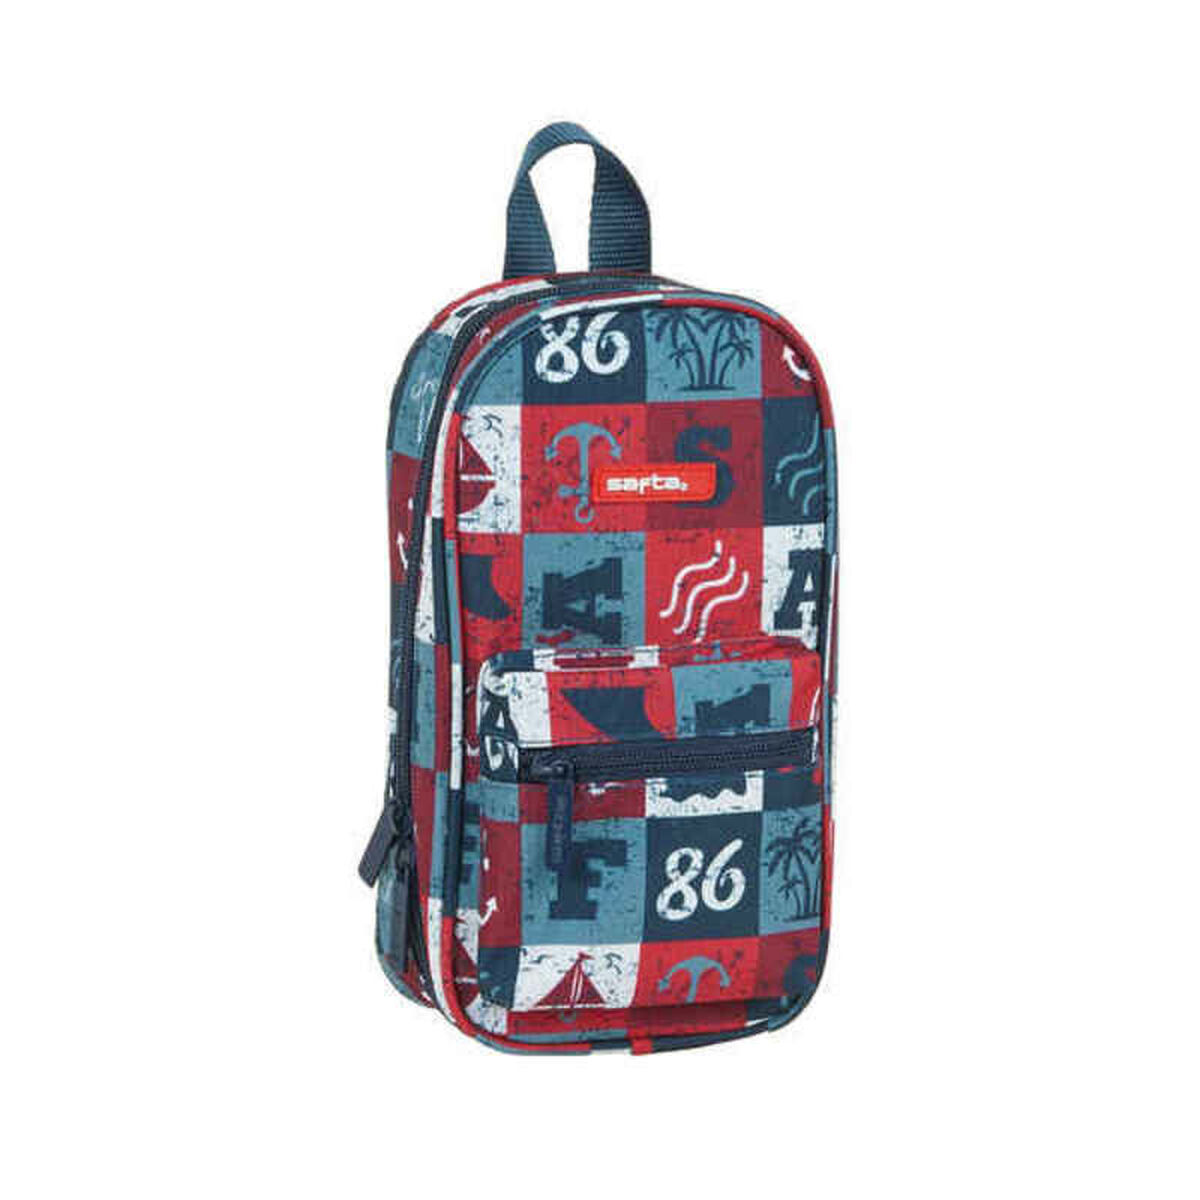 Pencil Case Backpack Safta (33 Piese)